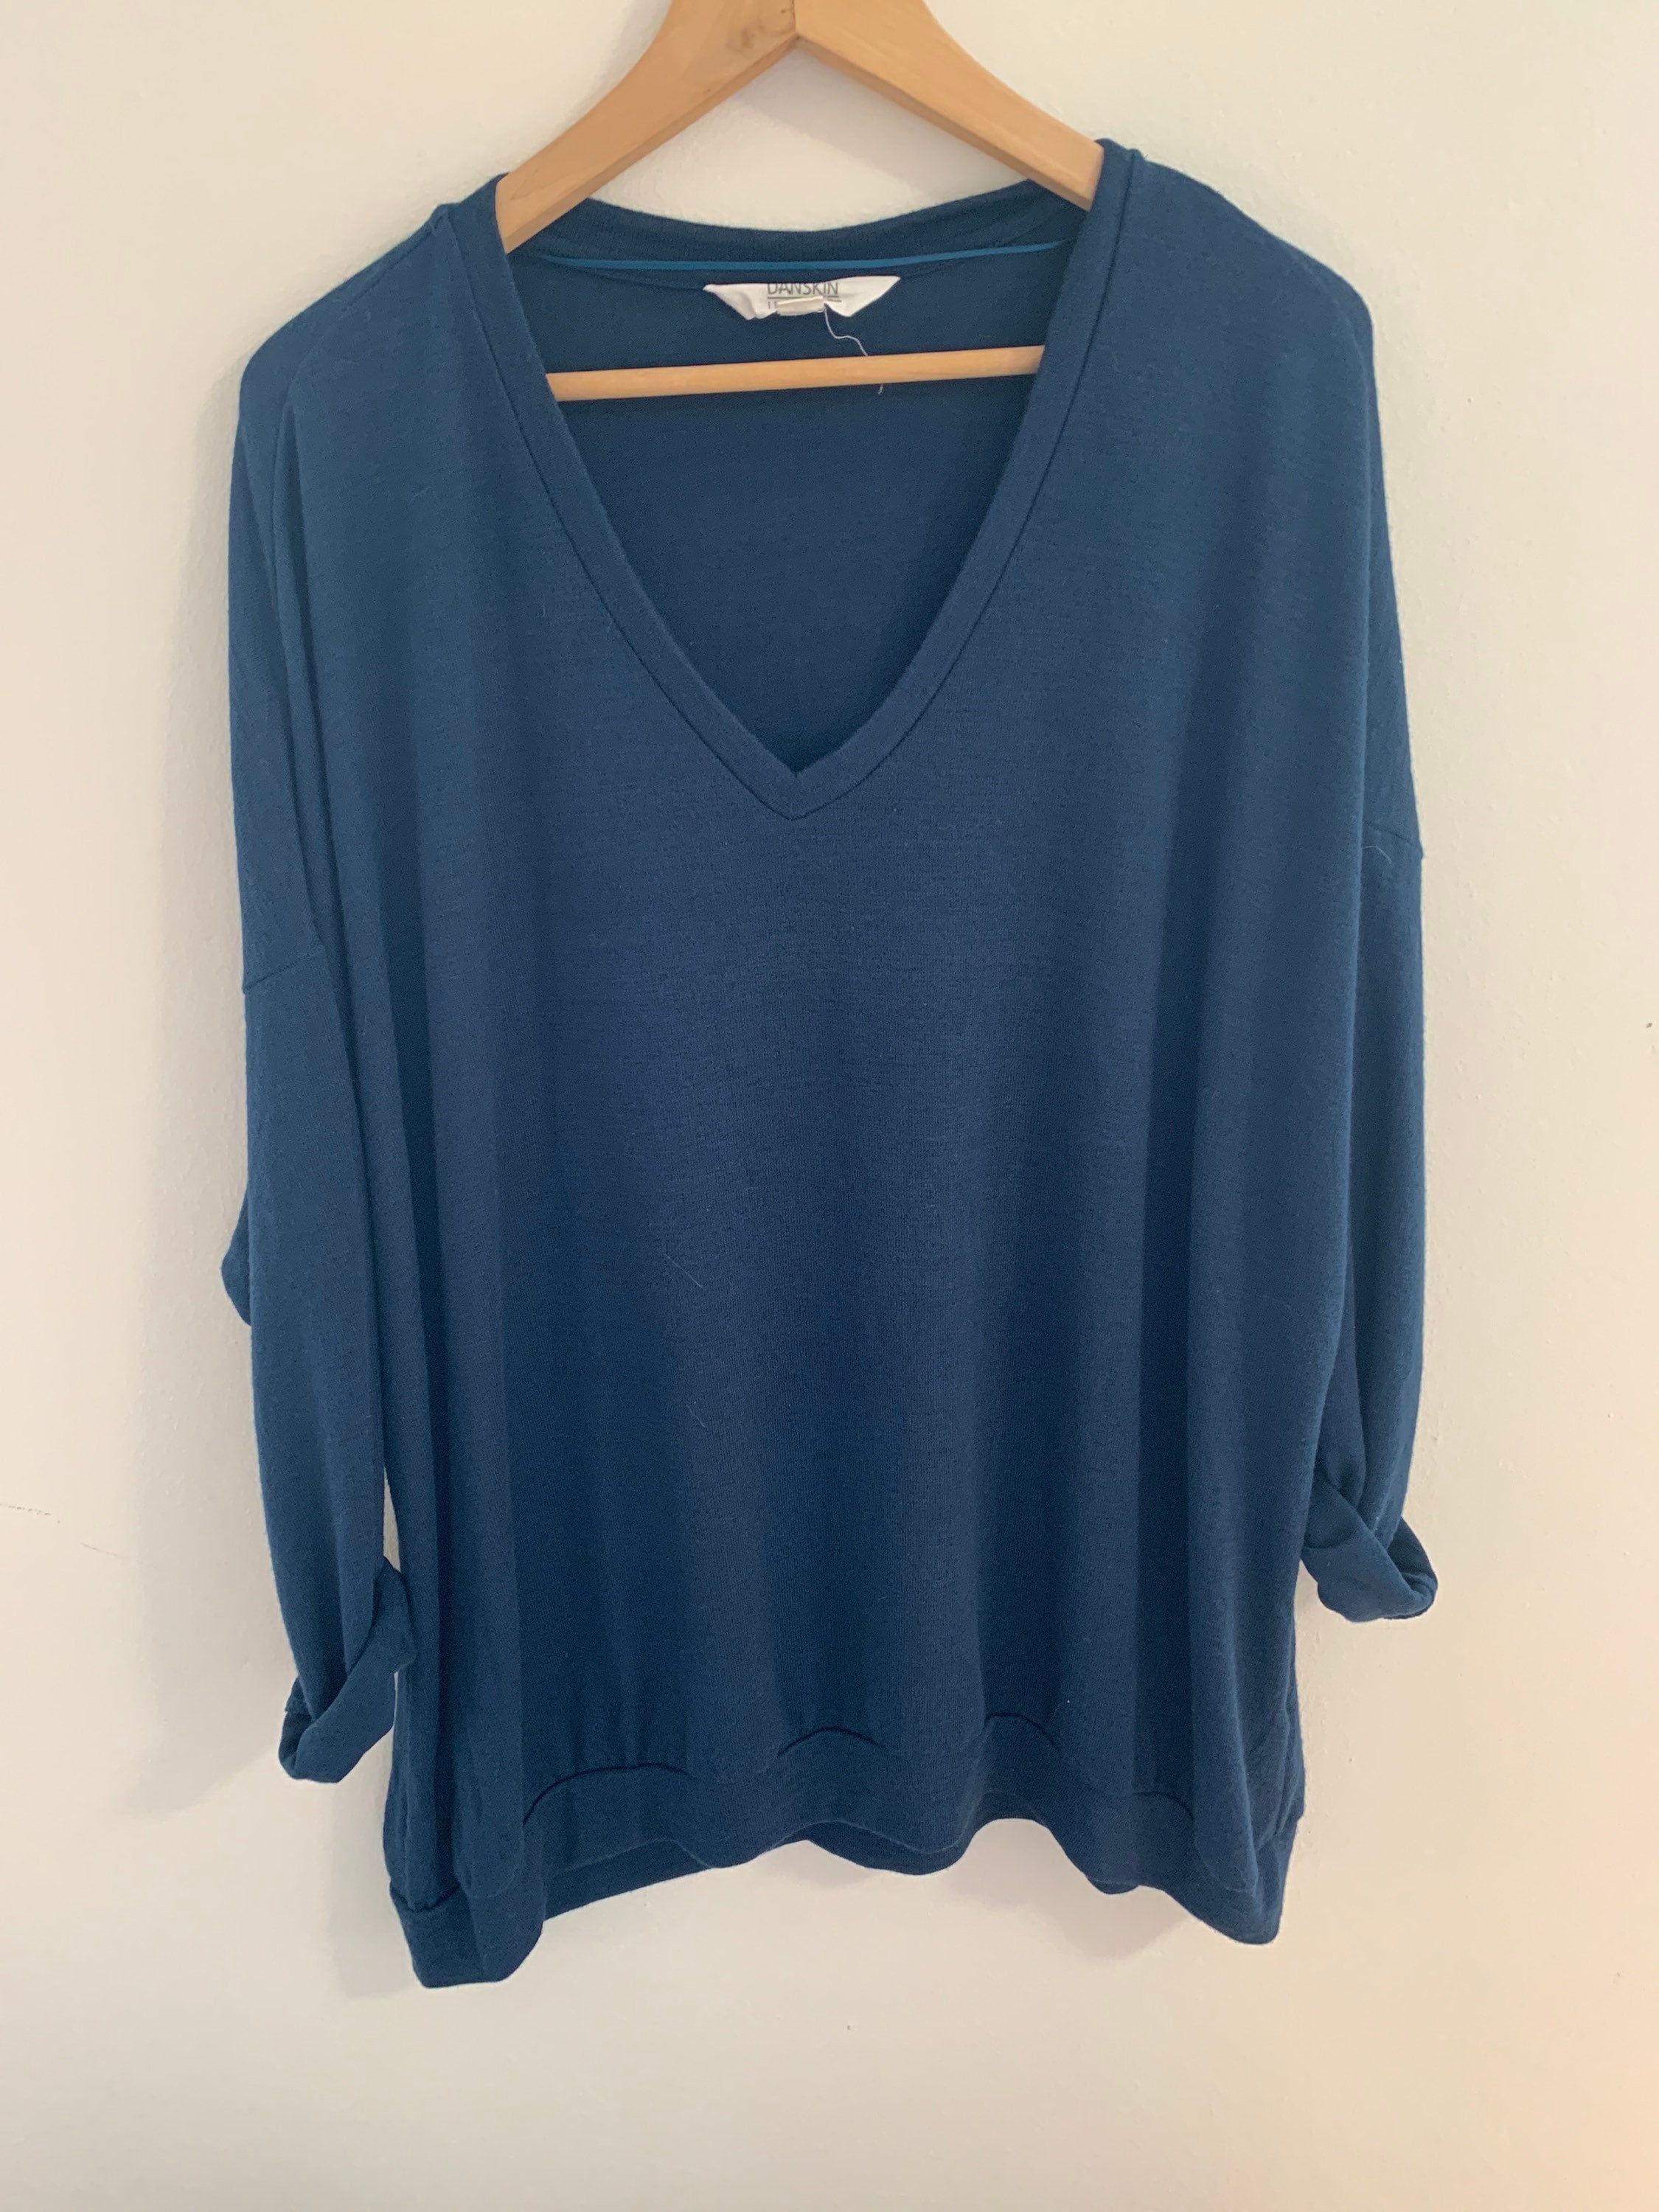 DANSKIN Knit Top Oversized Navy Blue Pullover Soft Rayon Blend Thin Sweater  Long Sleeves Loose Fit 2X Plus Chest 60 -  Hong Kong